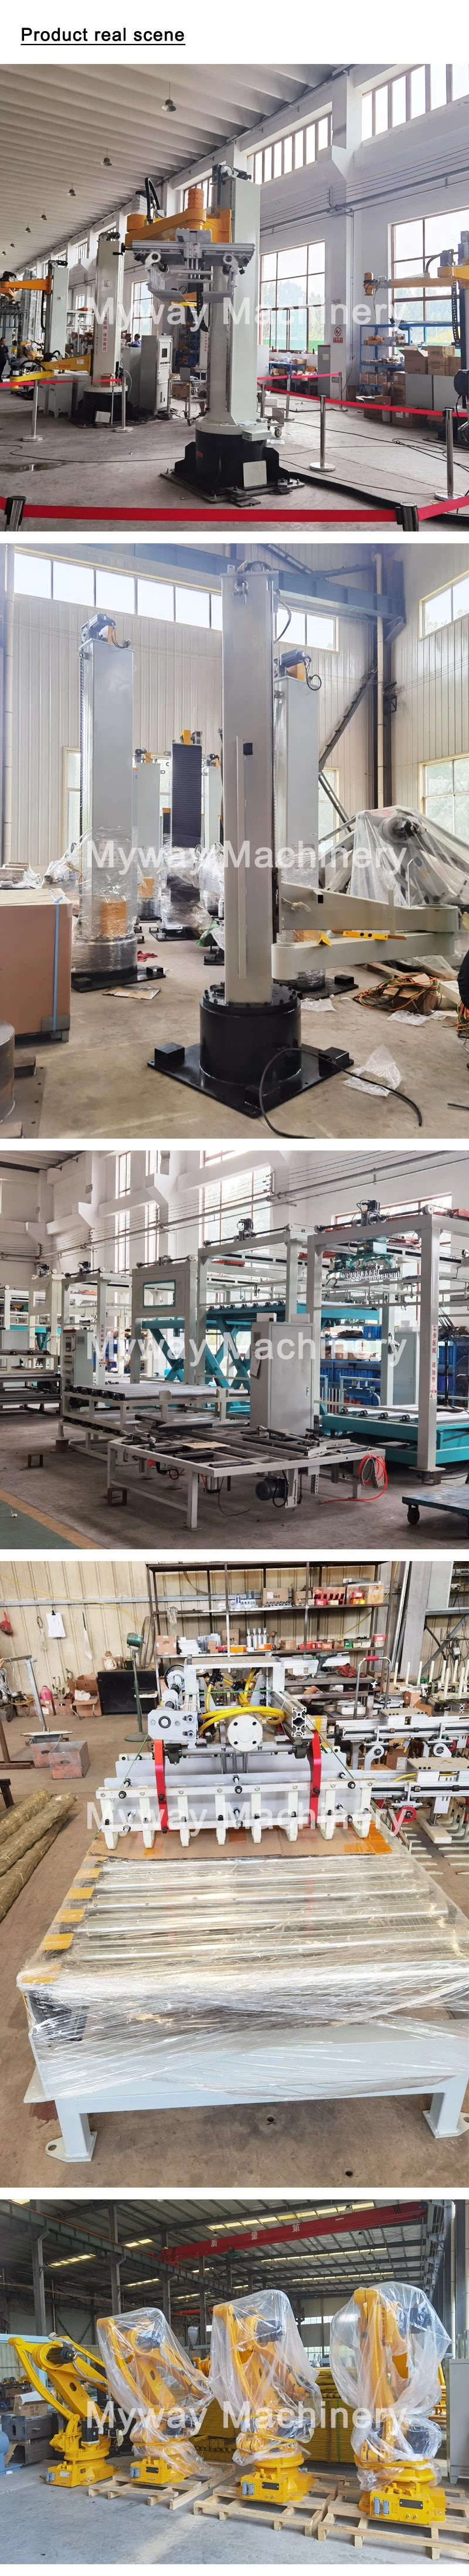 Automatic Palletizer Conveying and Packaging Line Robot Palletizing Cartons Boxs Bags Gantry Type Palletizer Machine